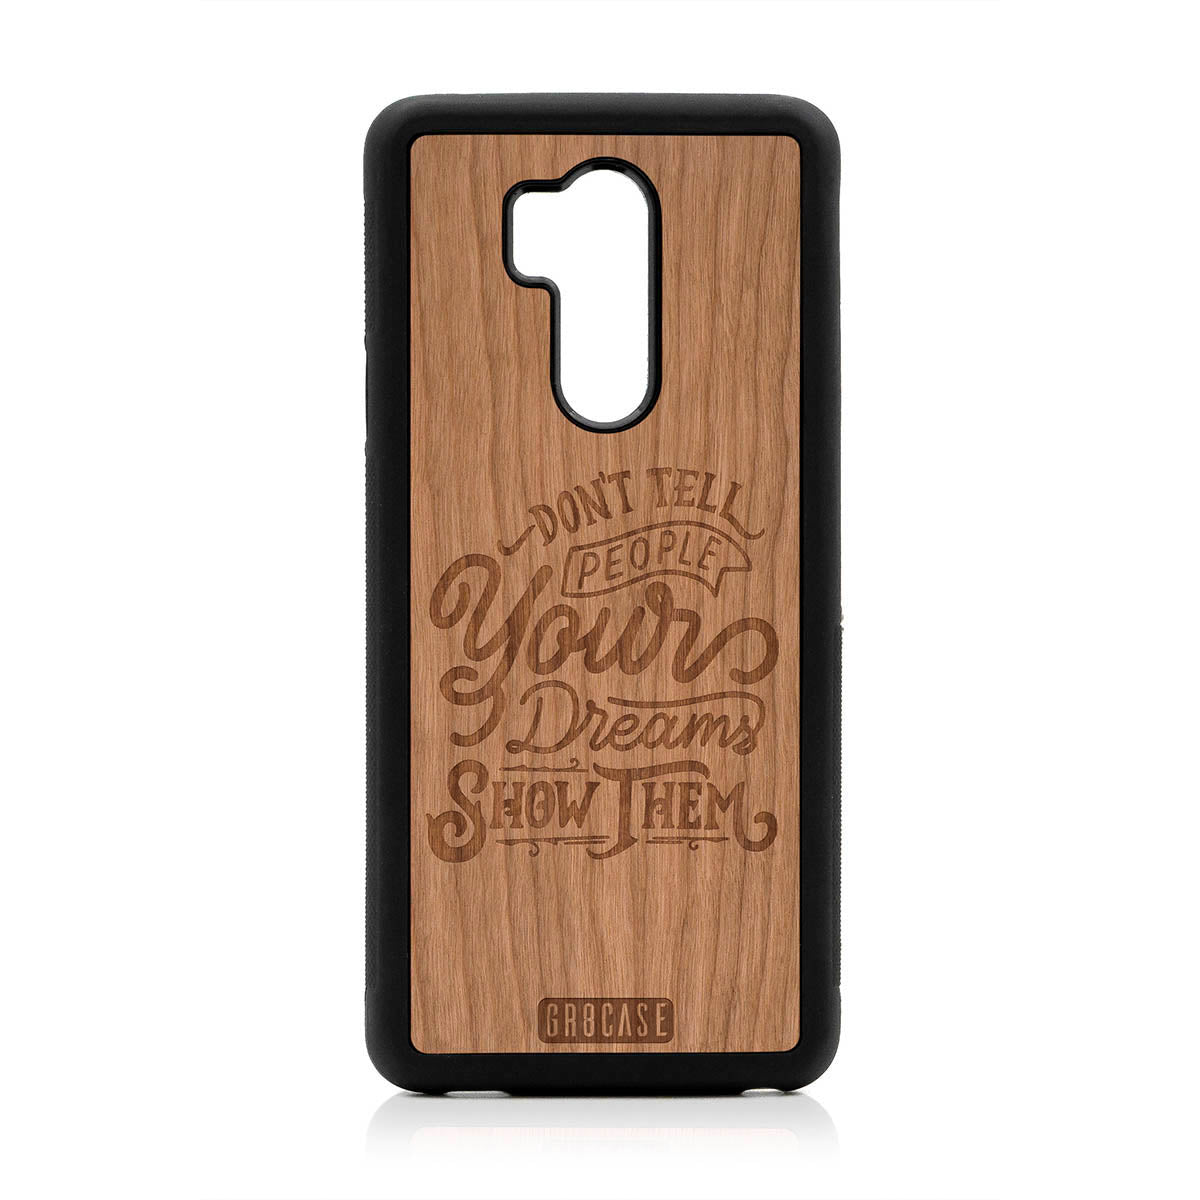 Don't Tell People Your Dreams Show Them Design Wood Case For LG G7 ThinQ by GR8CASE